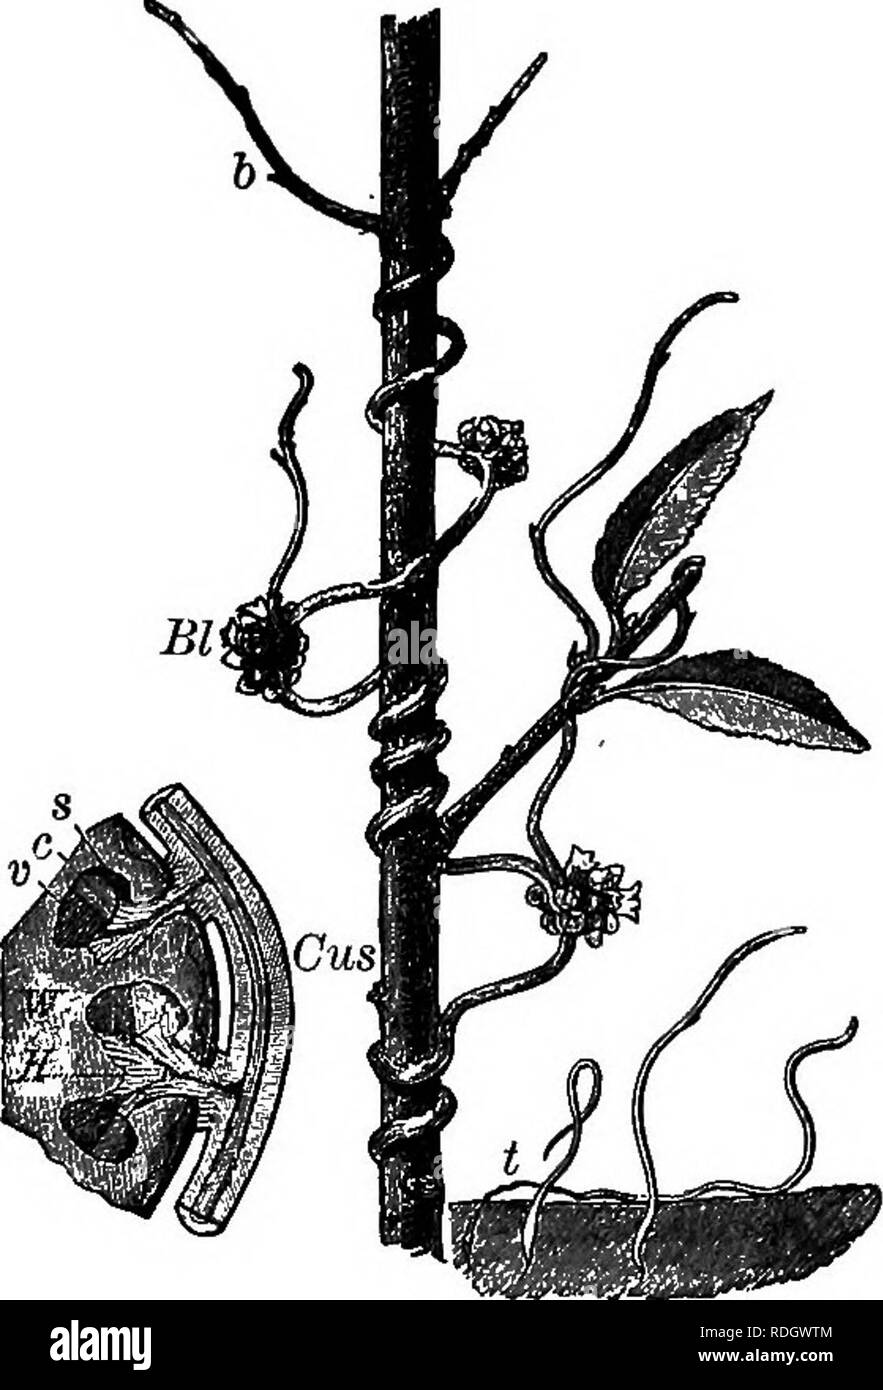 . Elements of botany. Botany; Botany. KOOTS. 29 strength of the supplies of ready-made sap which it obtains from the host. 43. Forms of Boots. â The primary root is that â which proceeds like a downward prolongation directly from the lower end of the caulicle. In many cases the mature root-system of the plant contains one main portion much larger than any of its branches. This is called a taproot, Fig. 16. Such a root, if much thickened and fleshy, would assume the form shown in the carrot, pars- nip, beet, turnip, salsify, or radish. Some plants produce multiple primary roots, a cluster proce Stock Photo